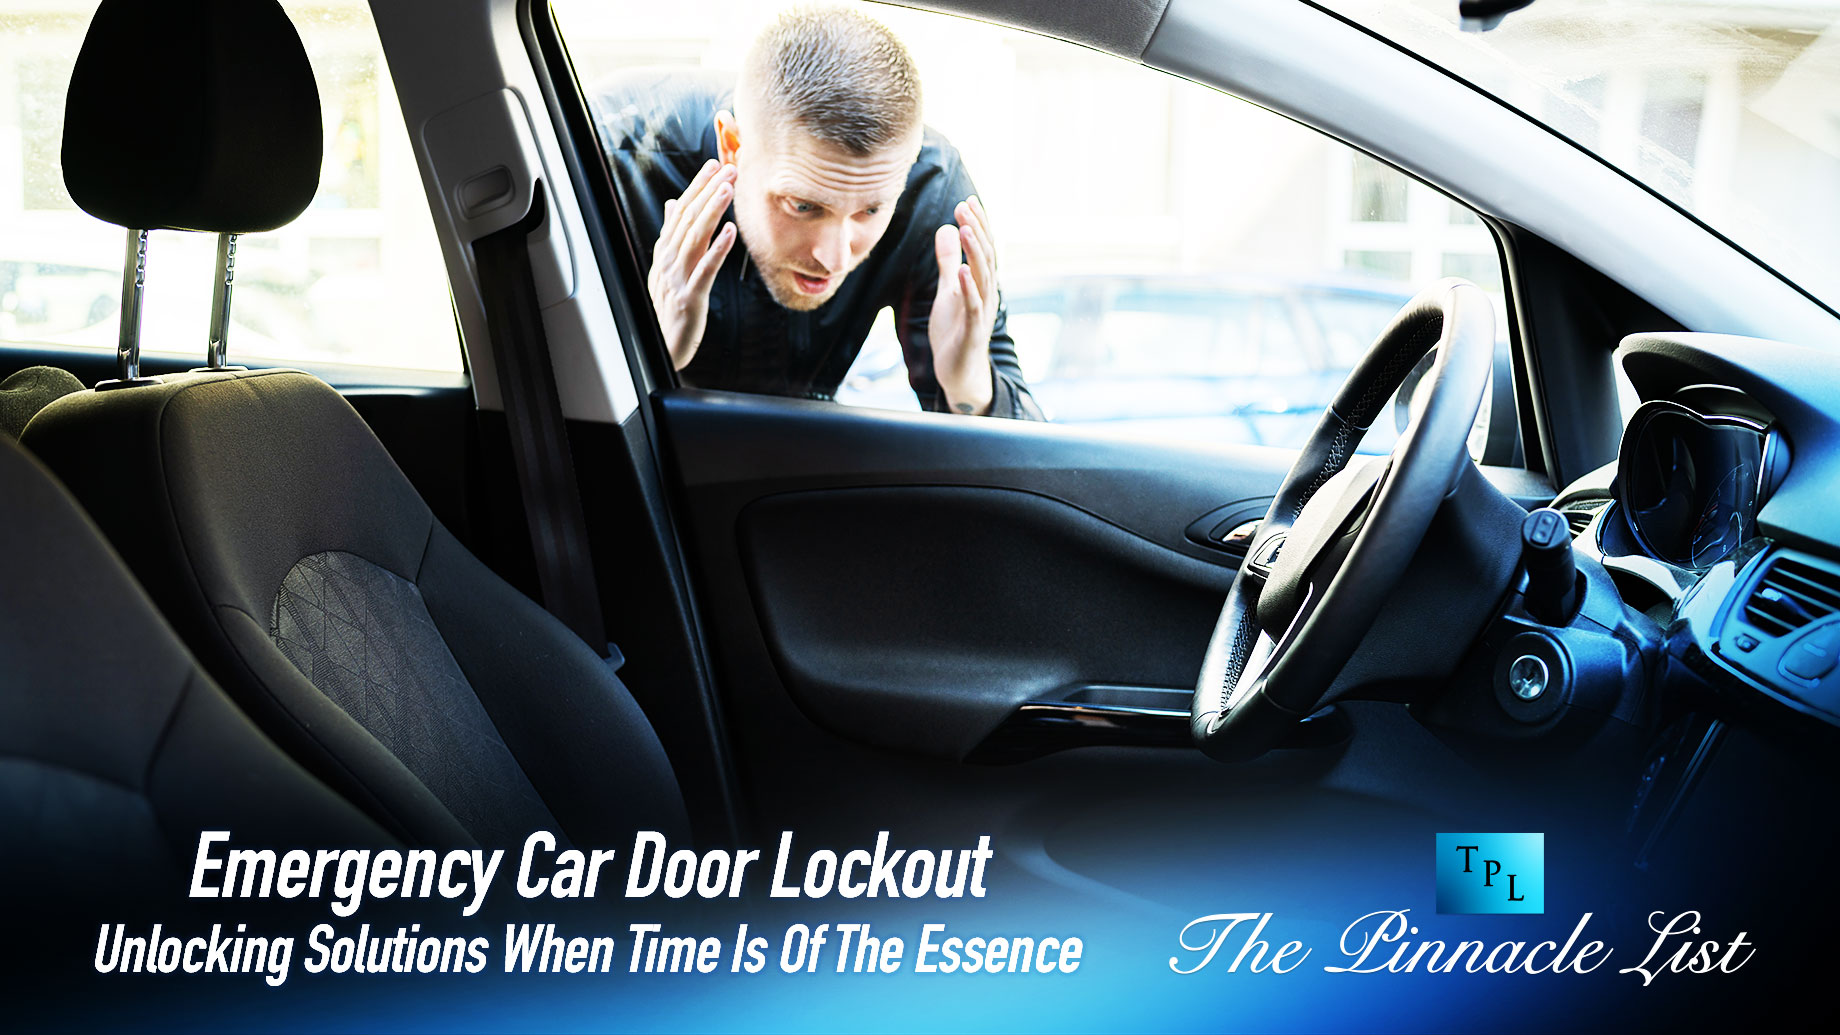 Emergency Car Door Lockout: Unlocking Solutions When Time Is Of The Essence